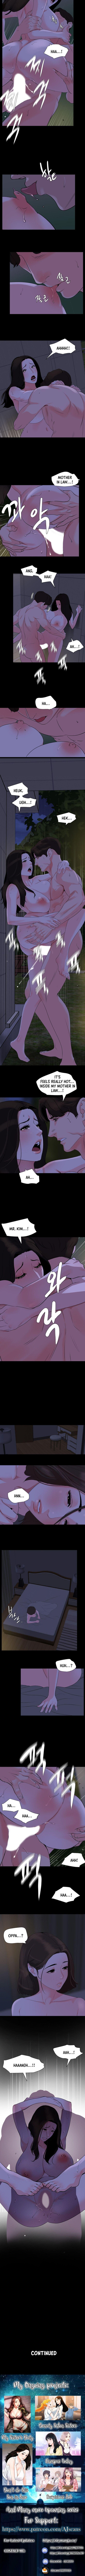 [Kkamja] Don't be like this son-in-law [English] 176